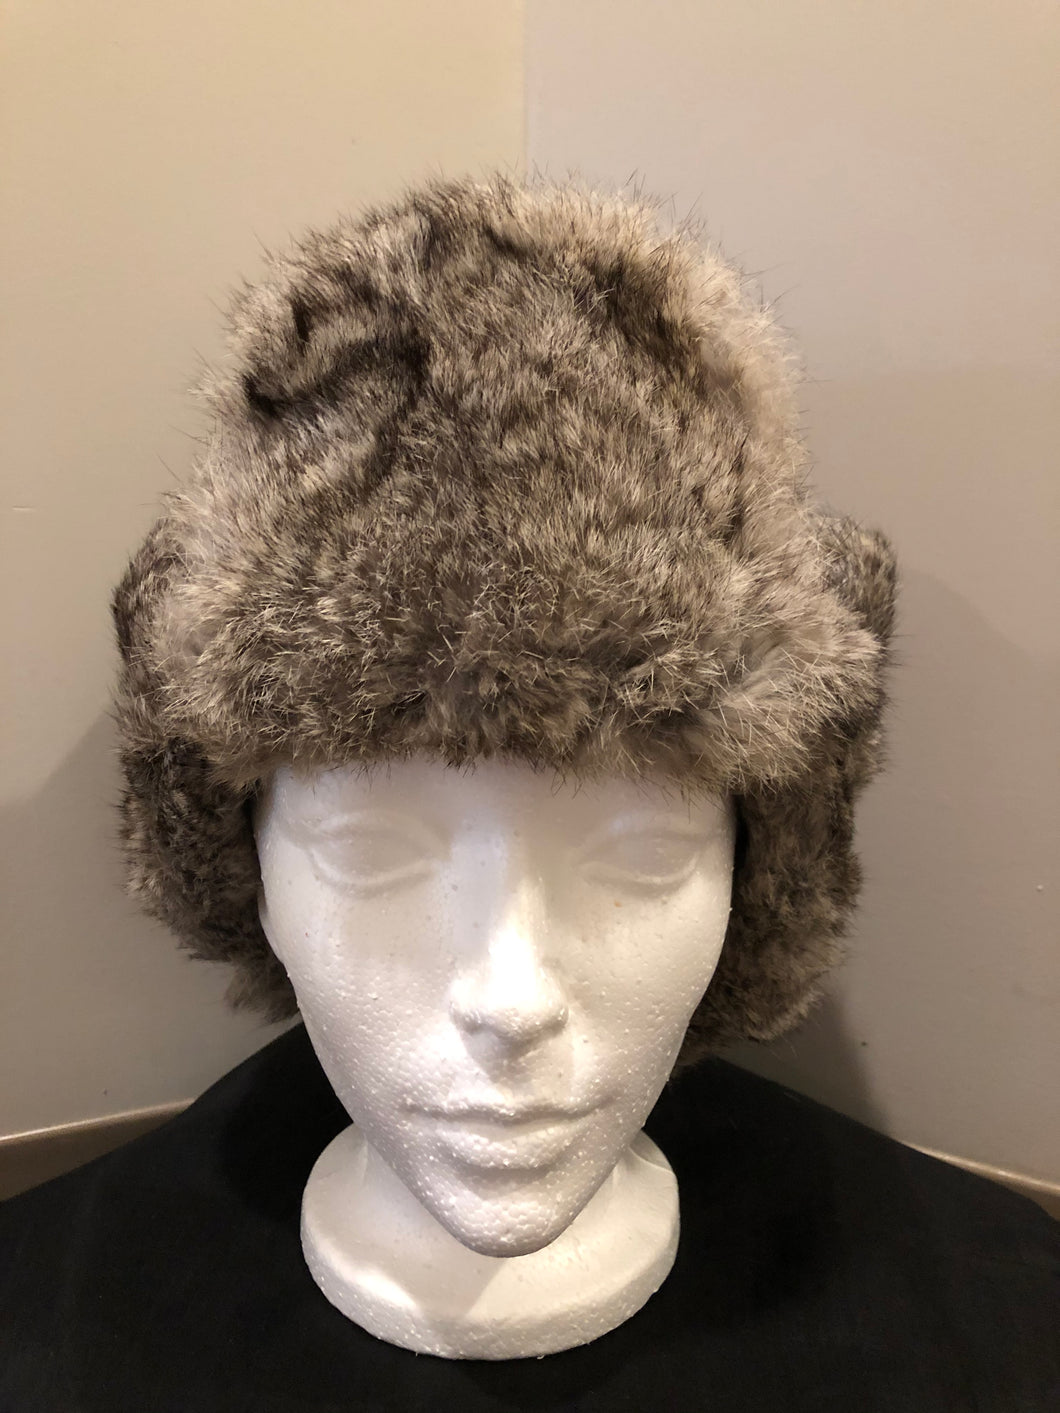 Kingspier Vintage - Vintage Crown Cap grey rabbit fur and navy wool blend trapper hat with quilted lining. Made in Manitoba, Canada. Size Medium.

This hat is in excellent condition.